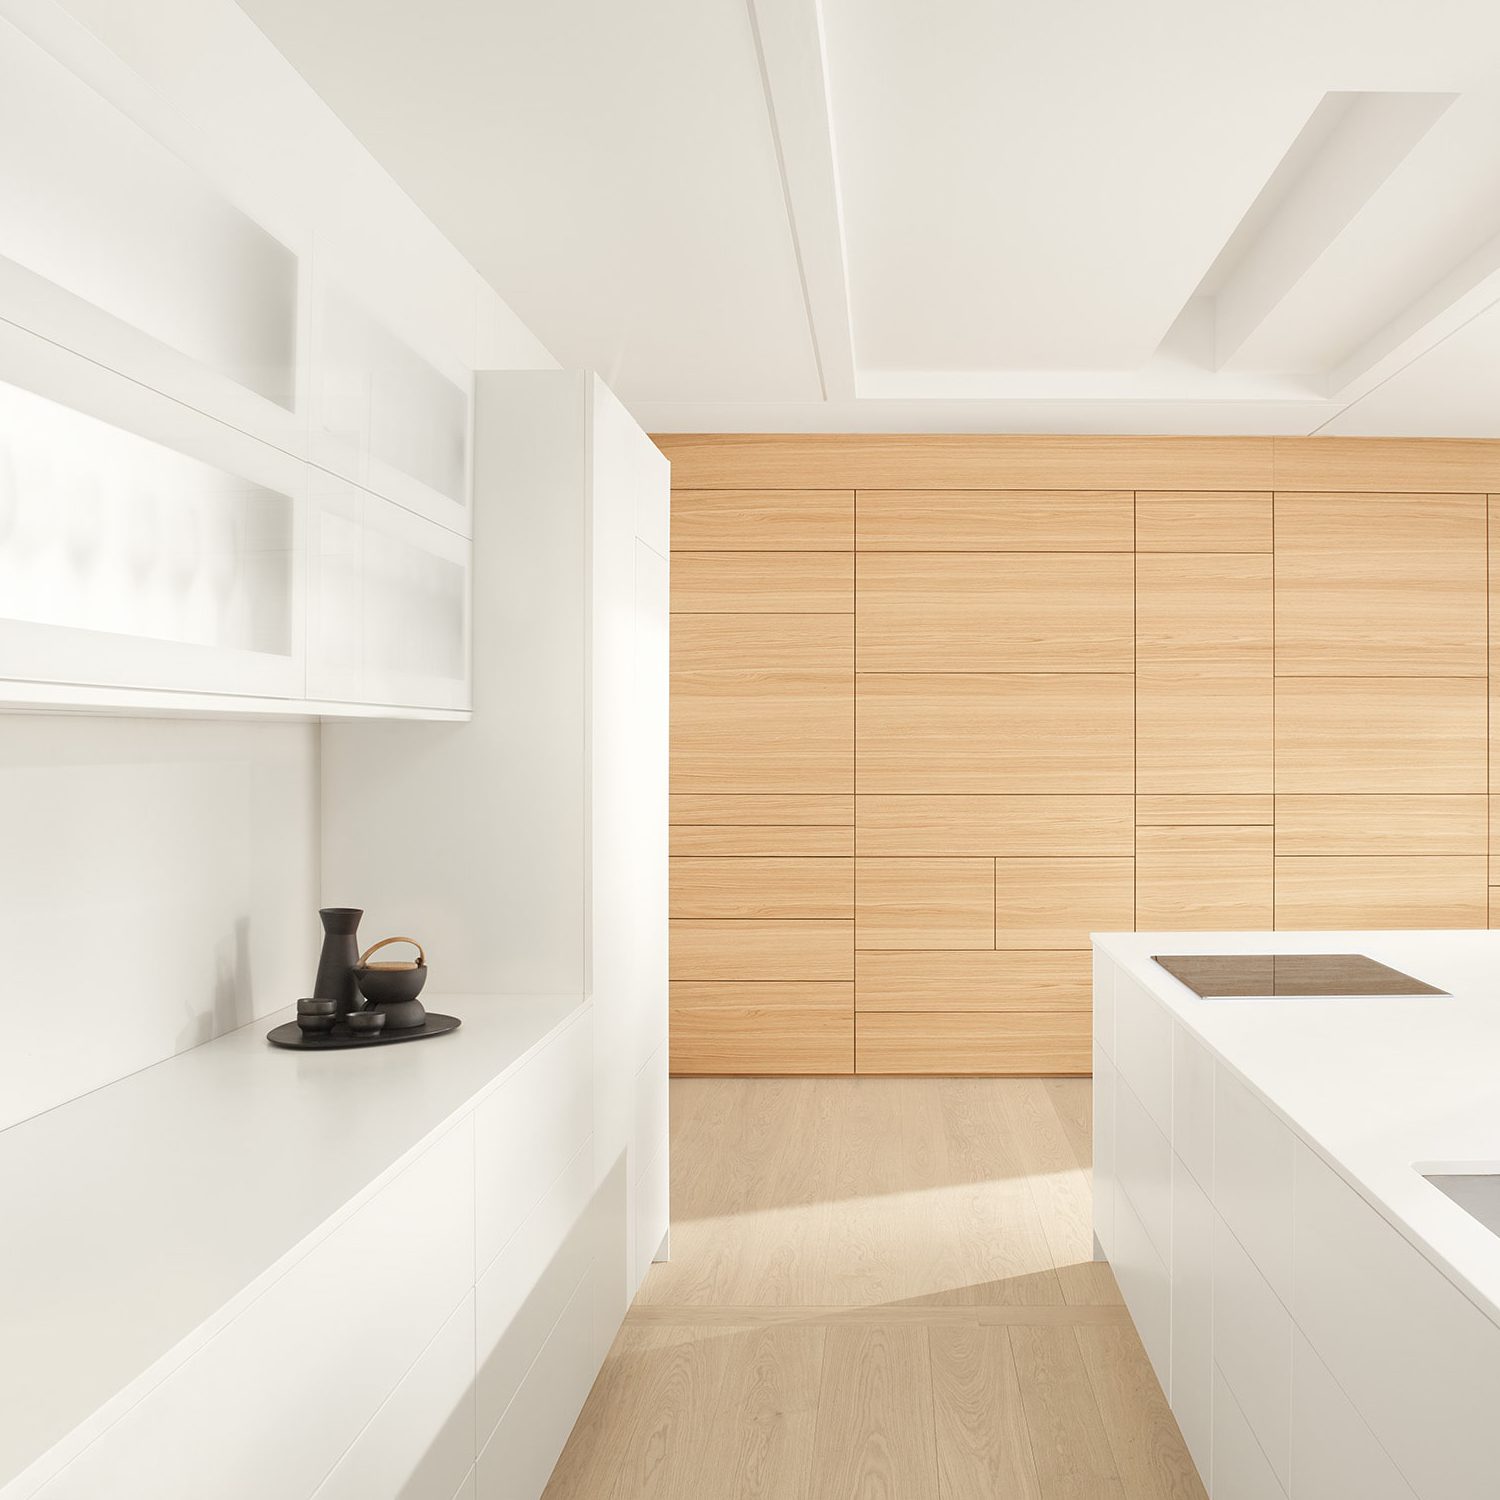 A picture perfect kitchen without handles can be achieved in various ways at Peter Hay